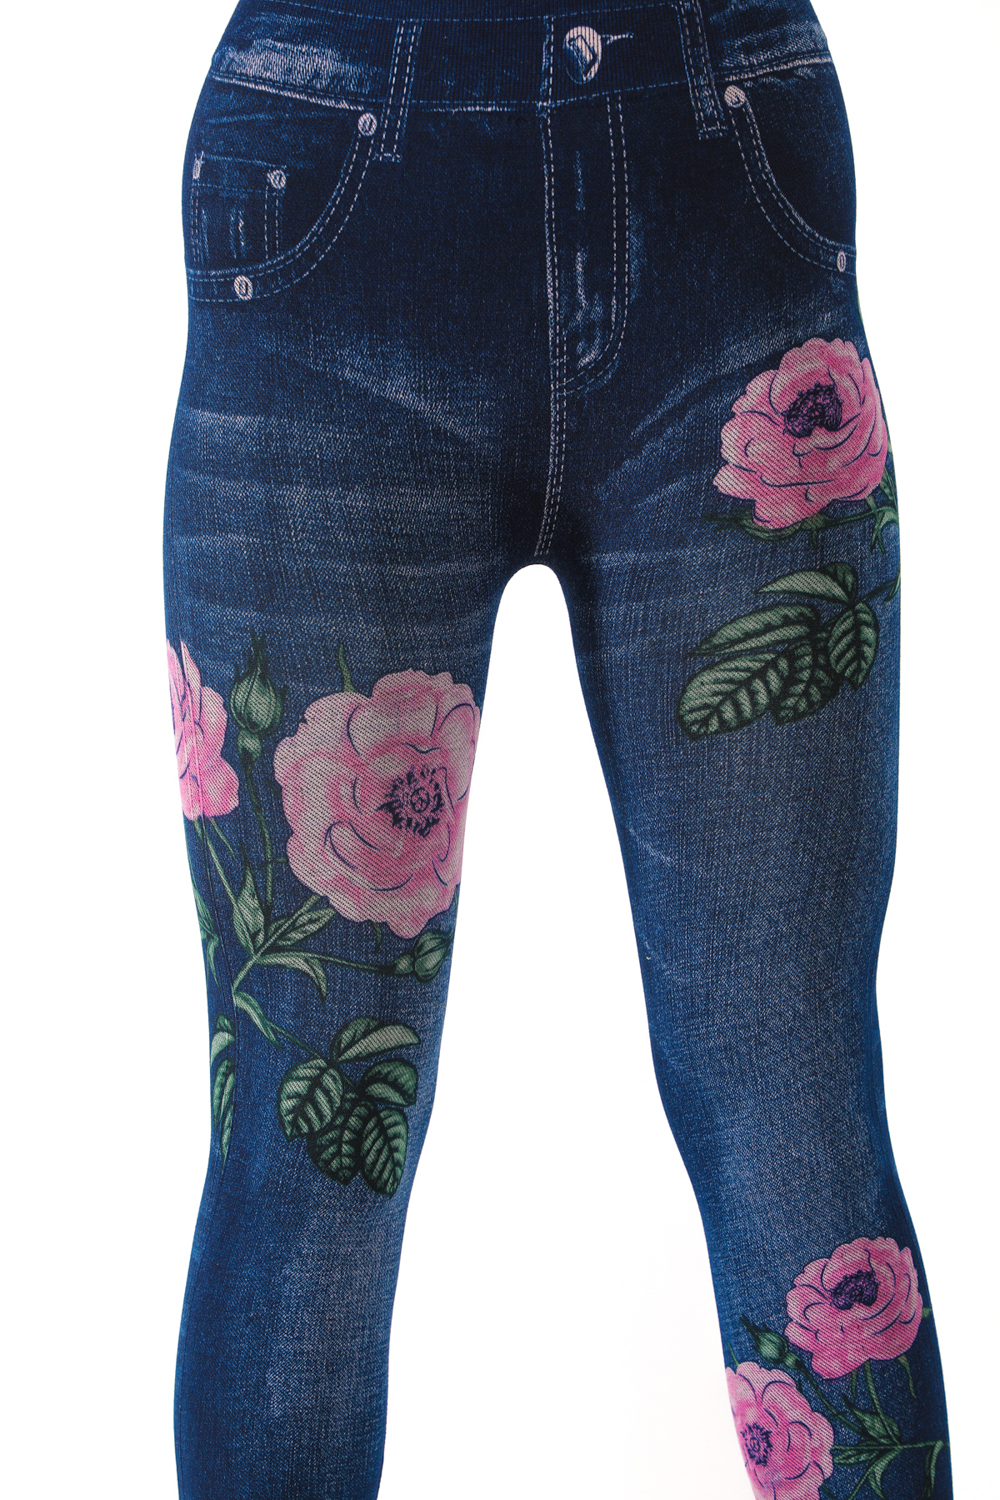 Denim Leggings with Colorful Floral Rosy Pattern